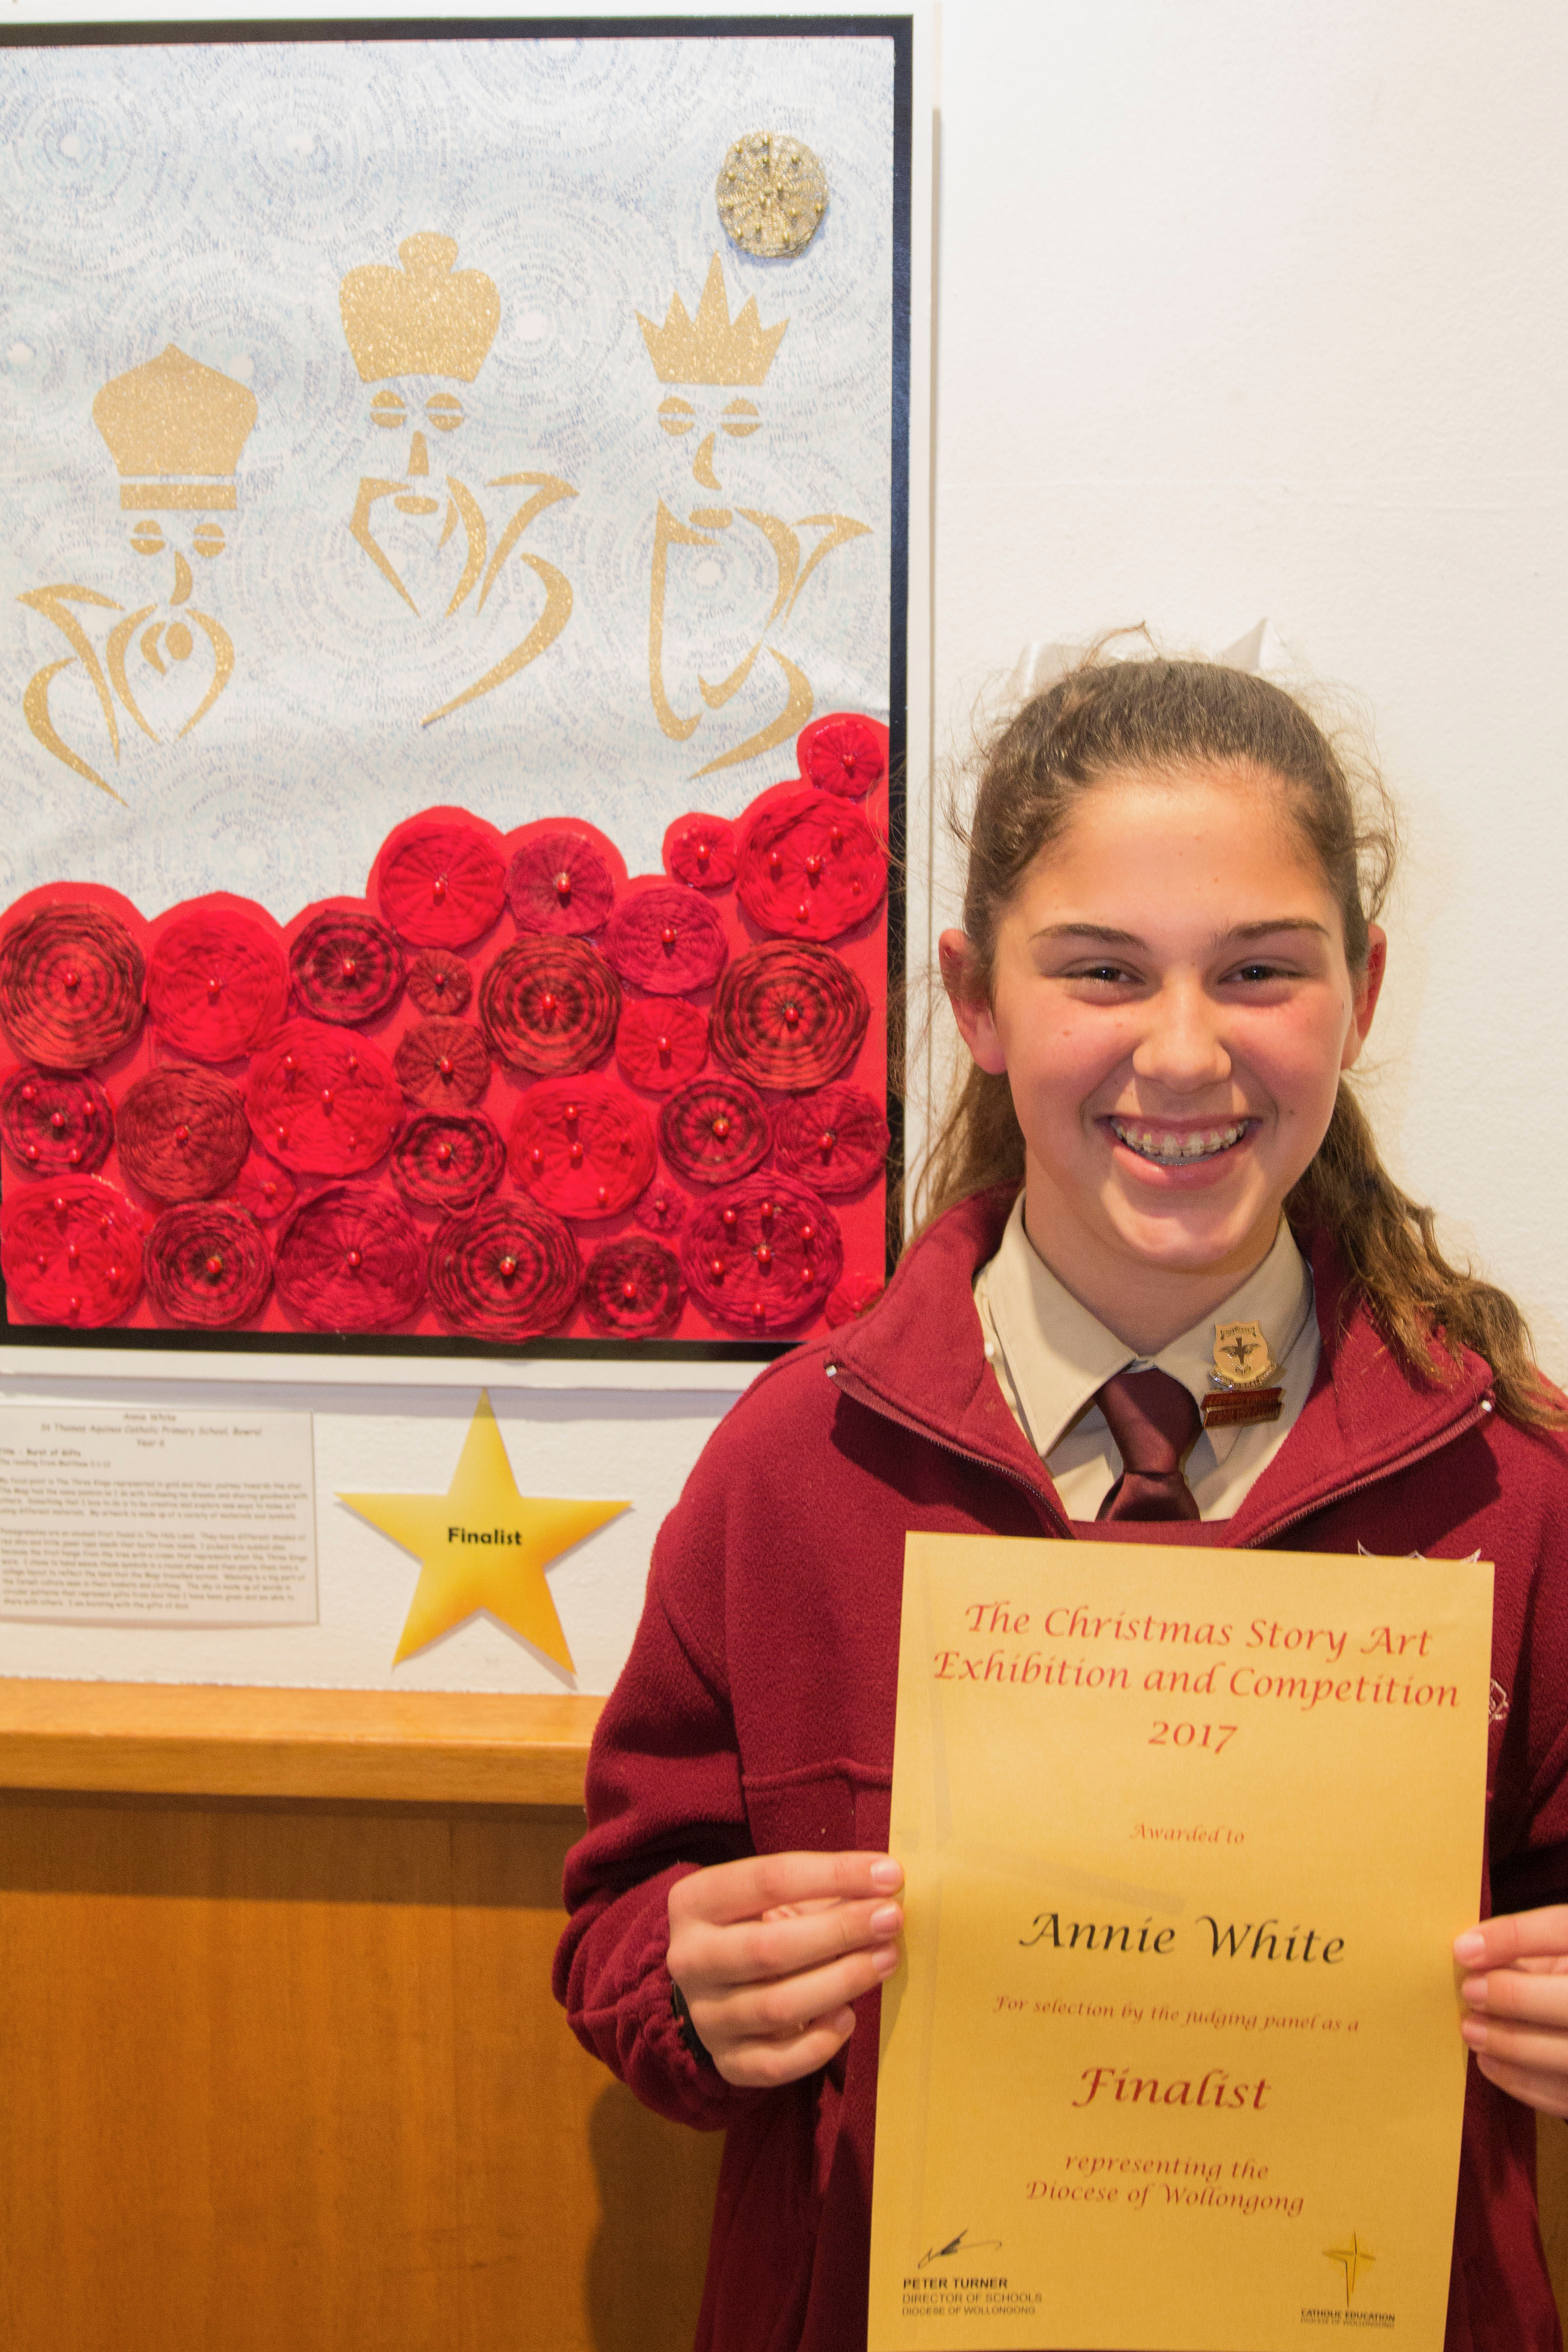 Our Young Artists Are Celebrated at the 2017 Christmas Story Art Exhibition » Catholic Education ...